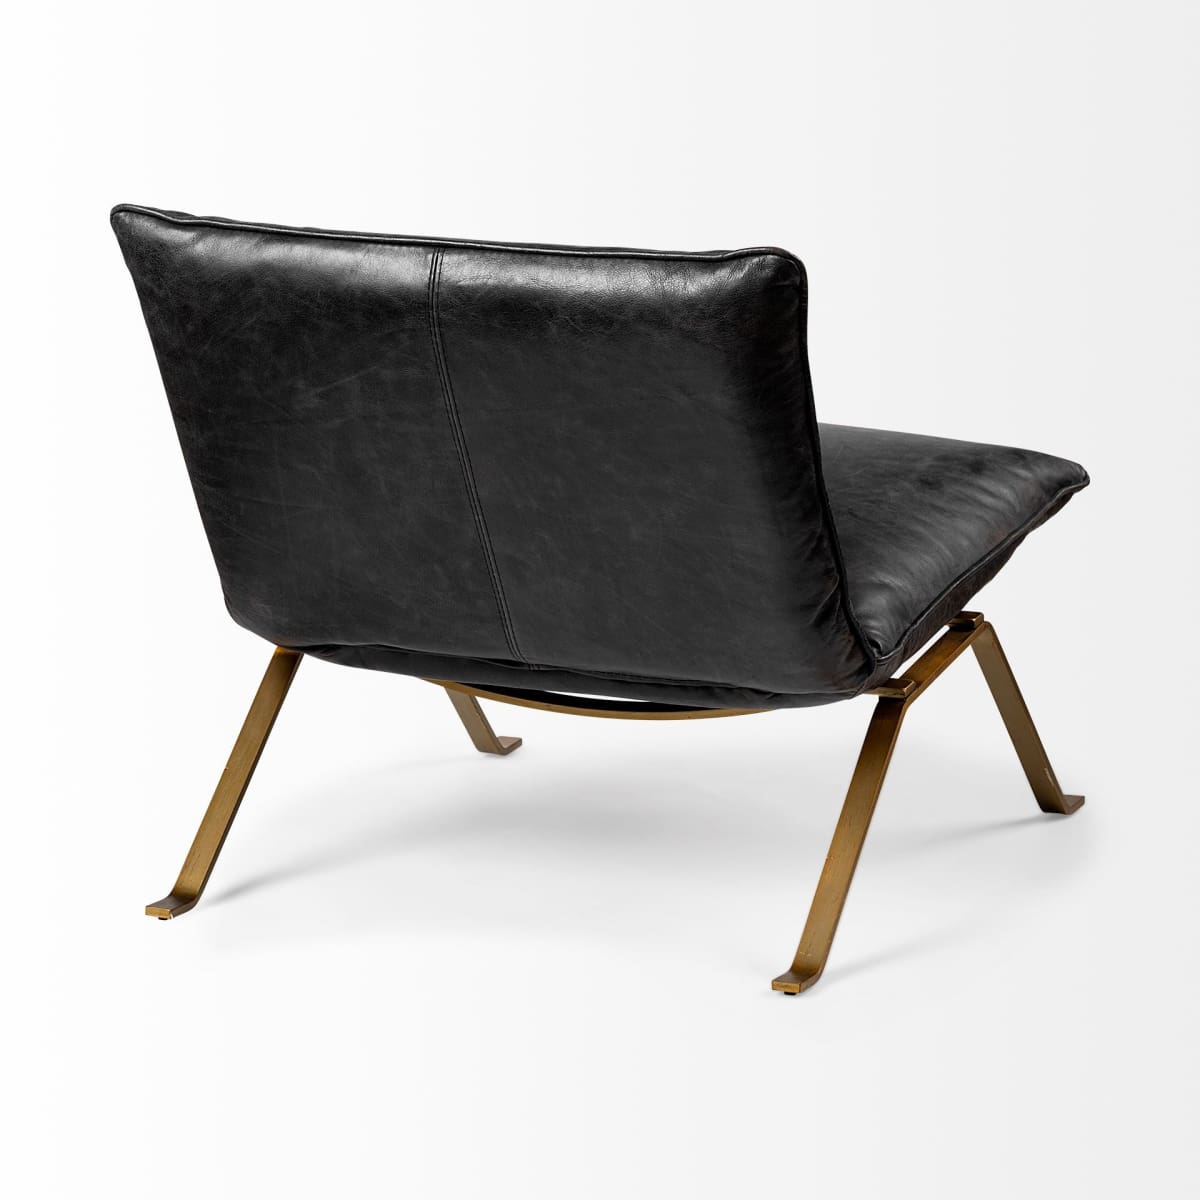 Flavelle Accent Chair Black Leather | Gold Iron - accent-chairs